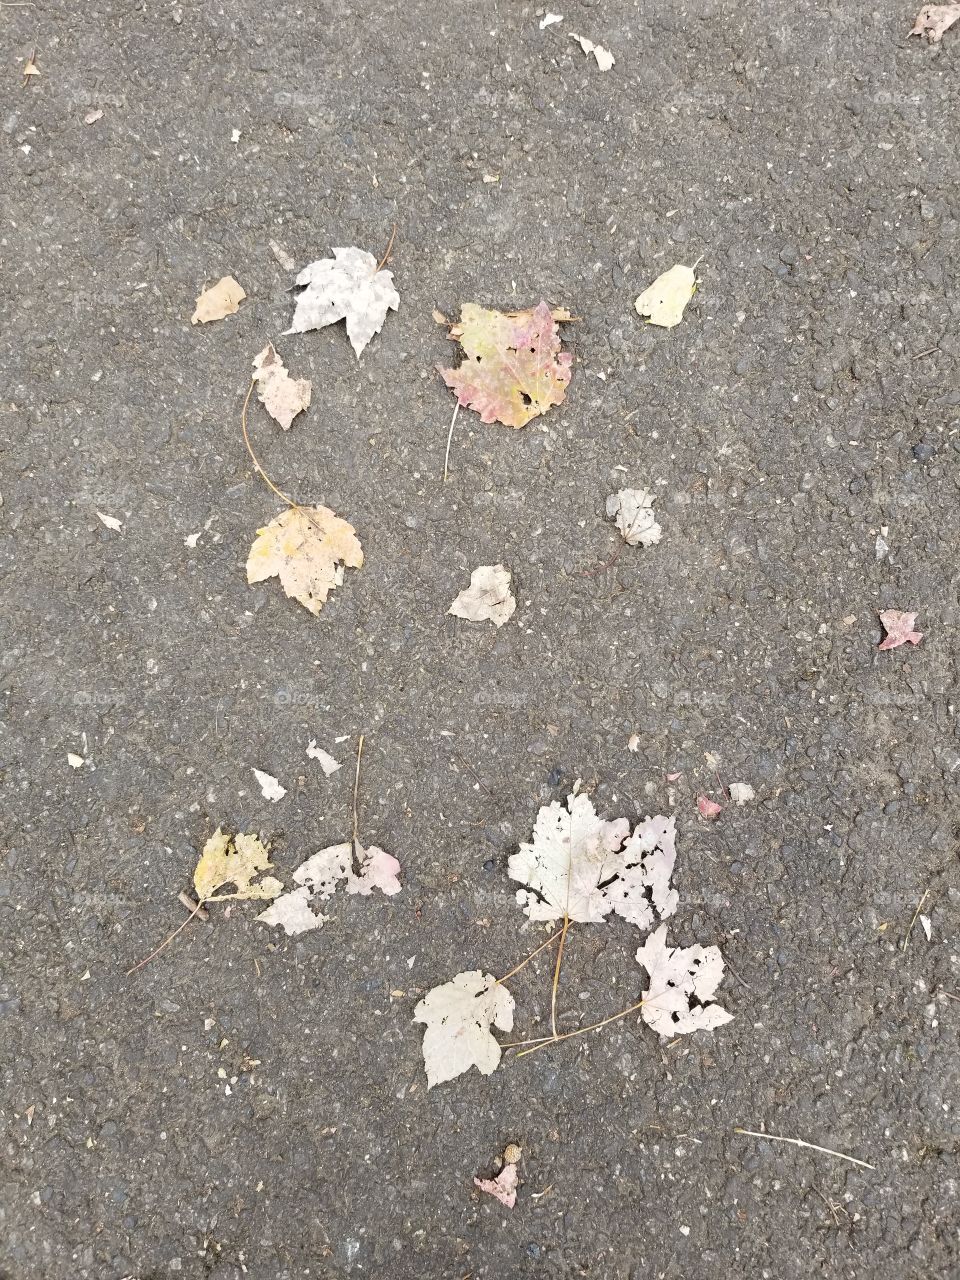 leaves while walking